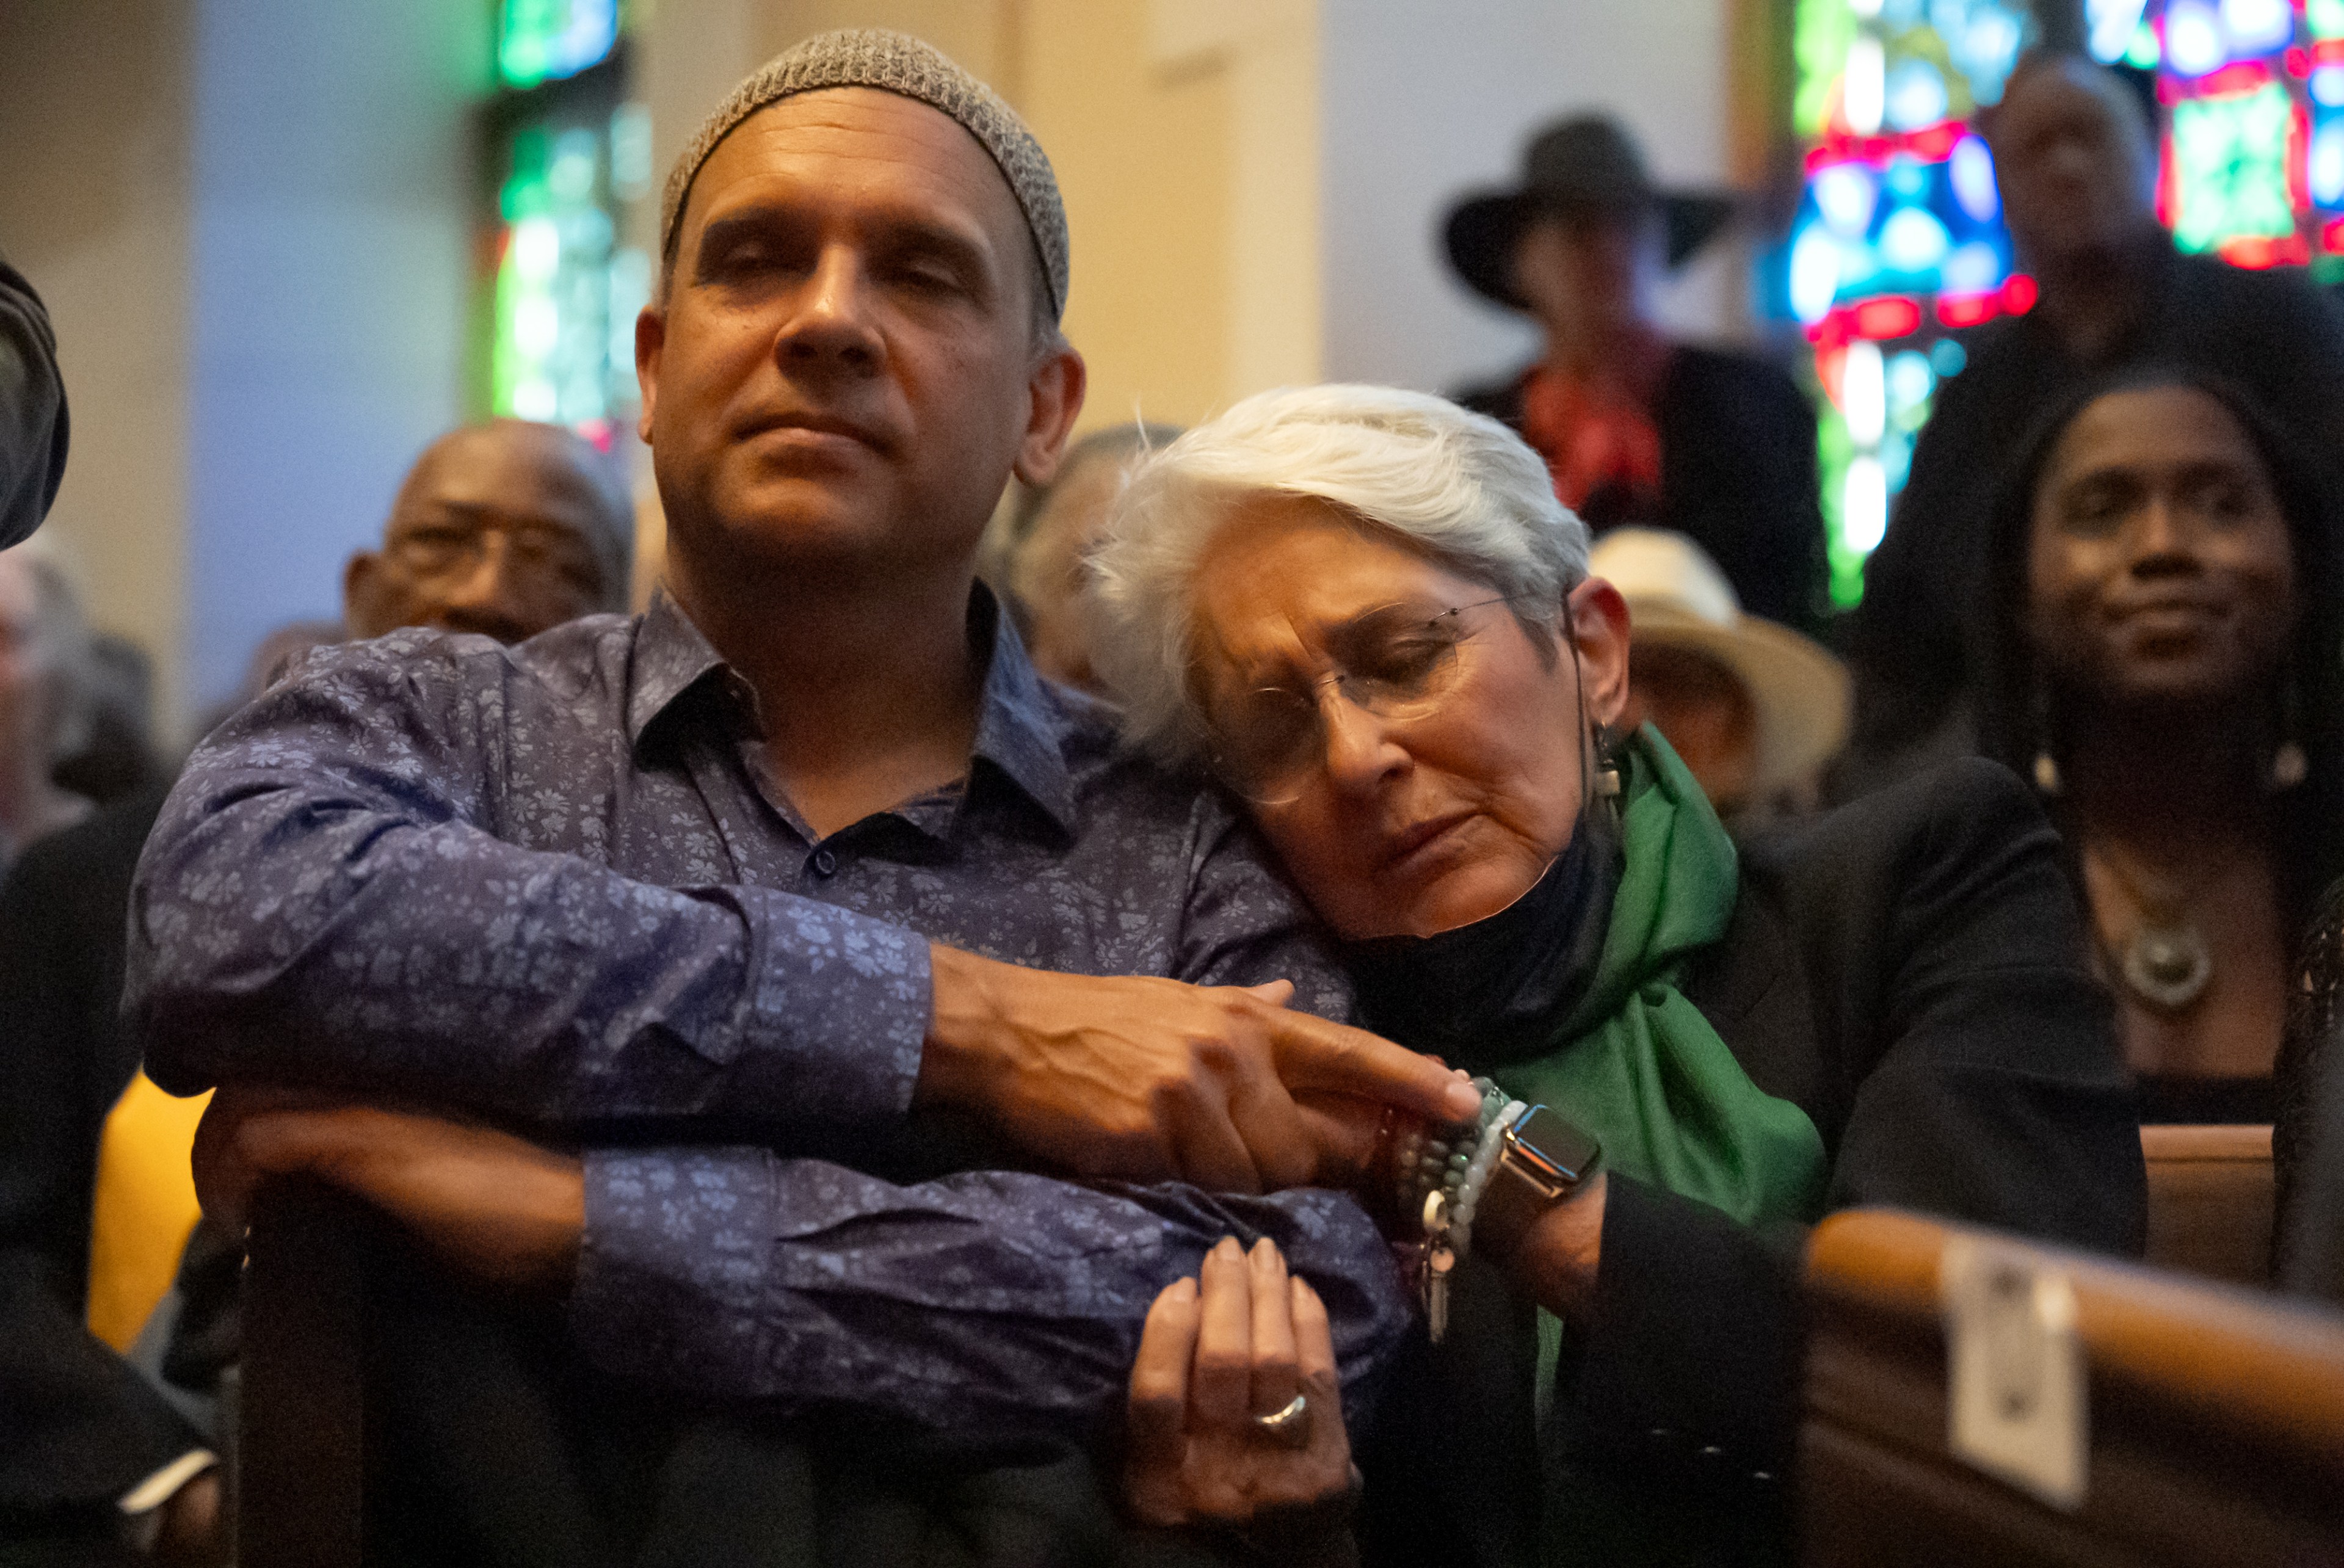 A man and woman in a church, woman leaning on man's shoulder, both appear contemplative, stained glass and other attendees in background.